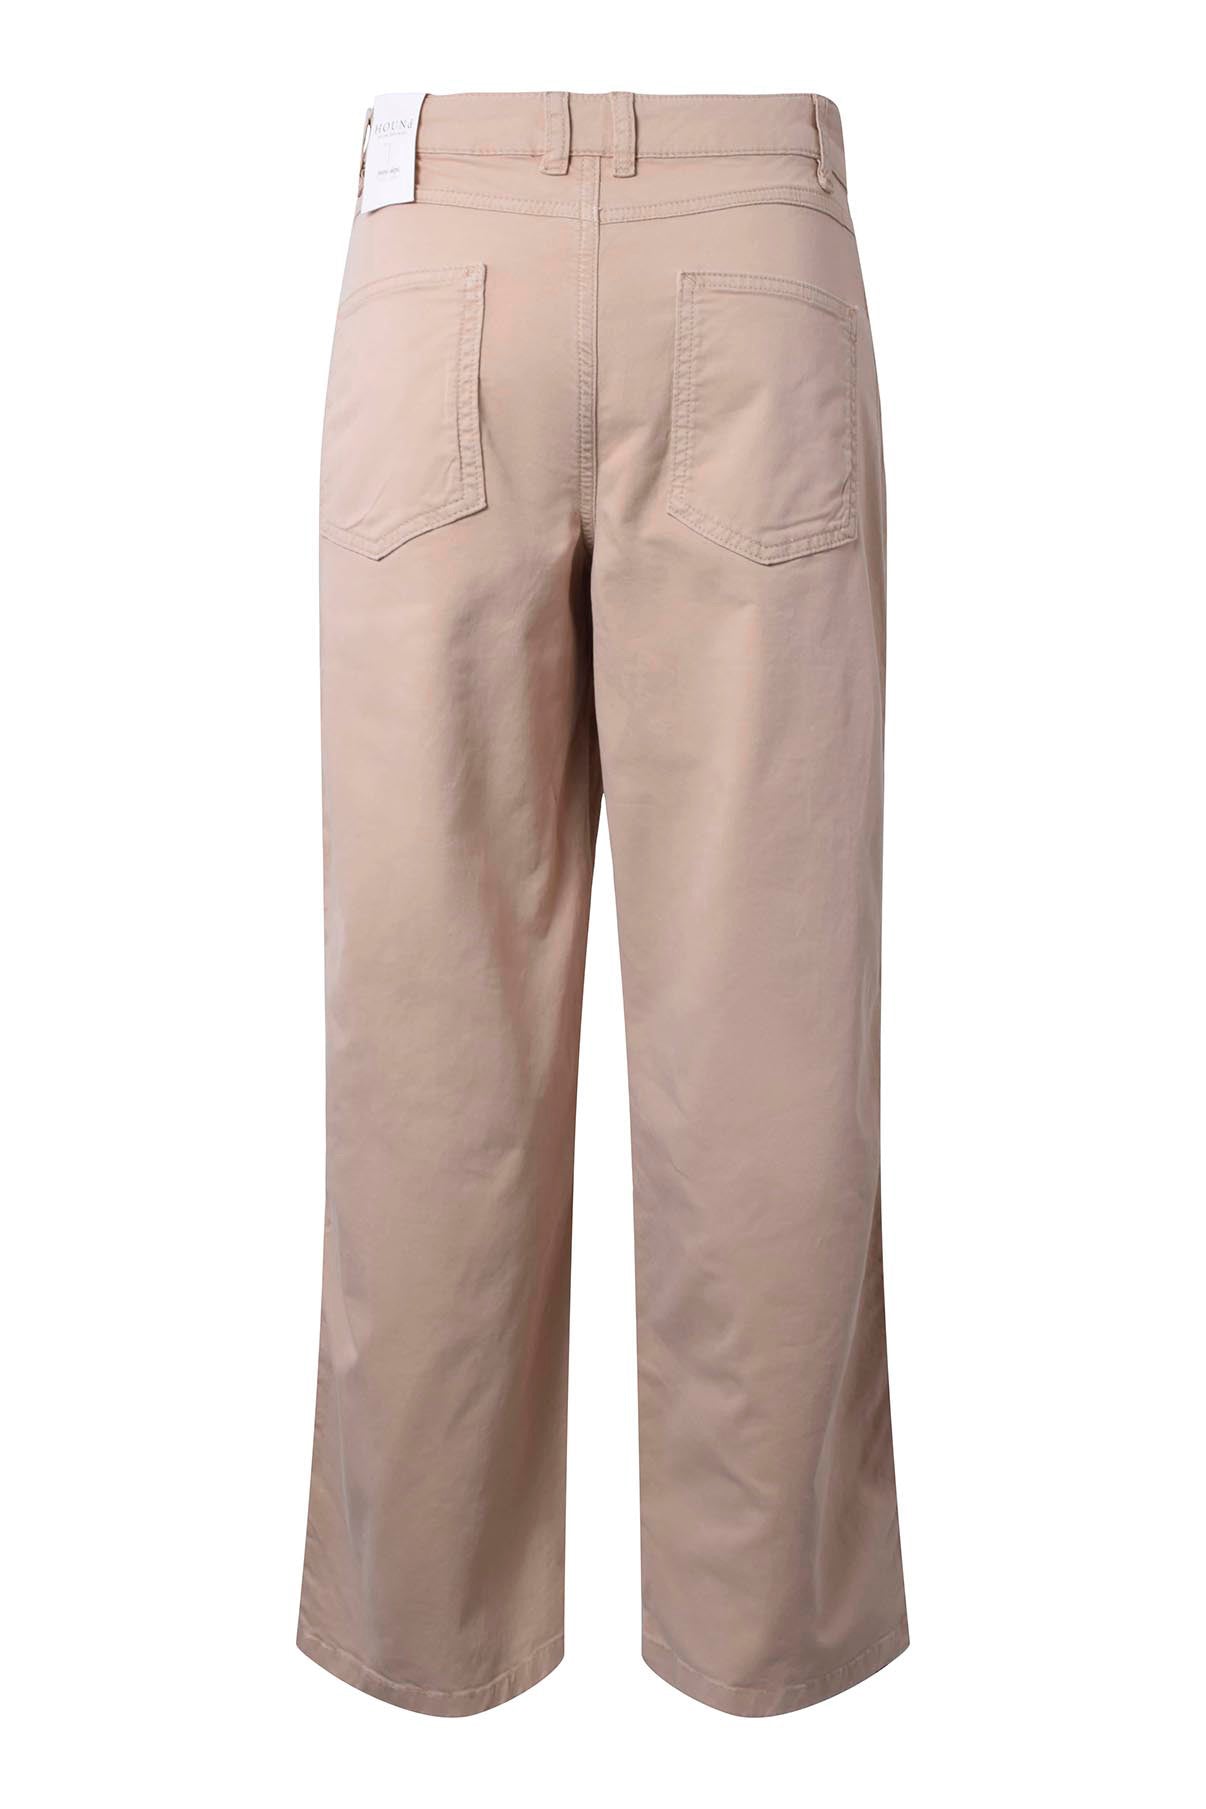 Hound Pants Extra Loose fit